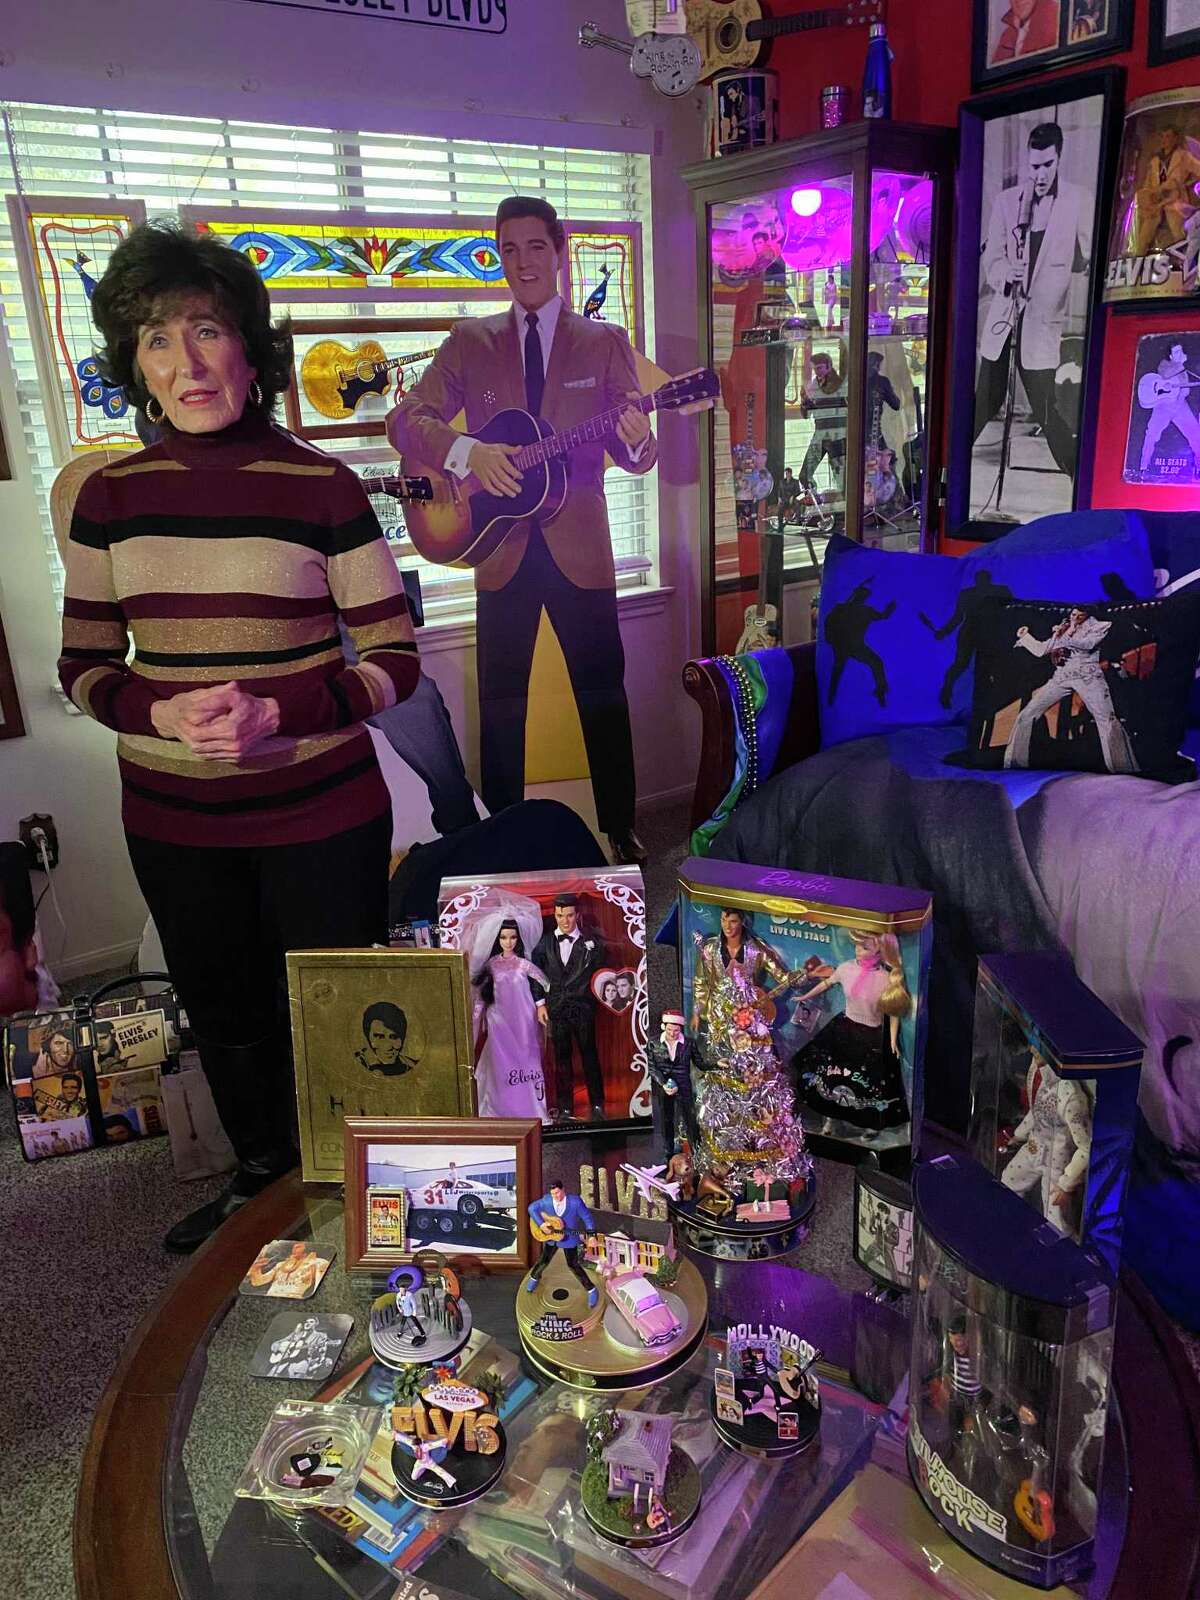 Conroe radio personality Mary McCoy has an extensive Elvis collection in her home. She played alongside "The King" on the Louisiana Hayride Tour in 1955 and has fond memories of him.